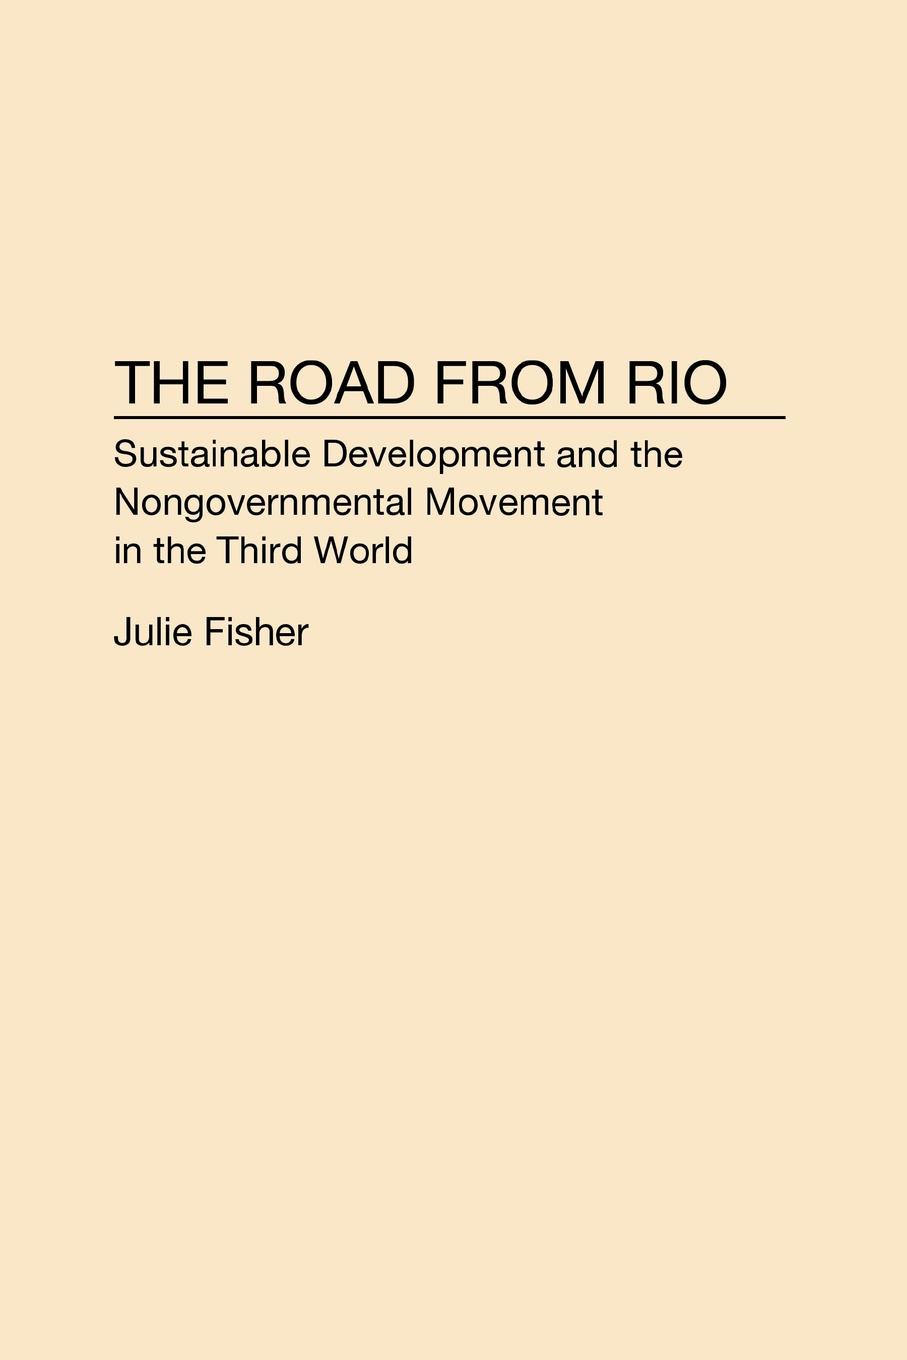 The Road from Rio. Sustainable Development and the Nongovernmental Movement in the Third World